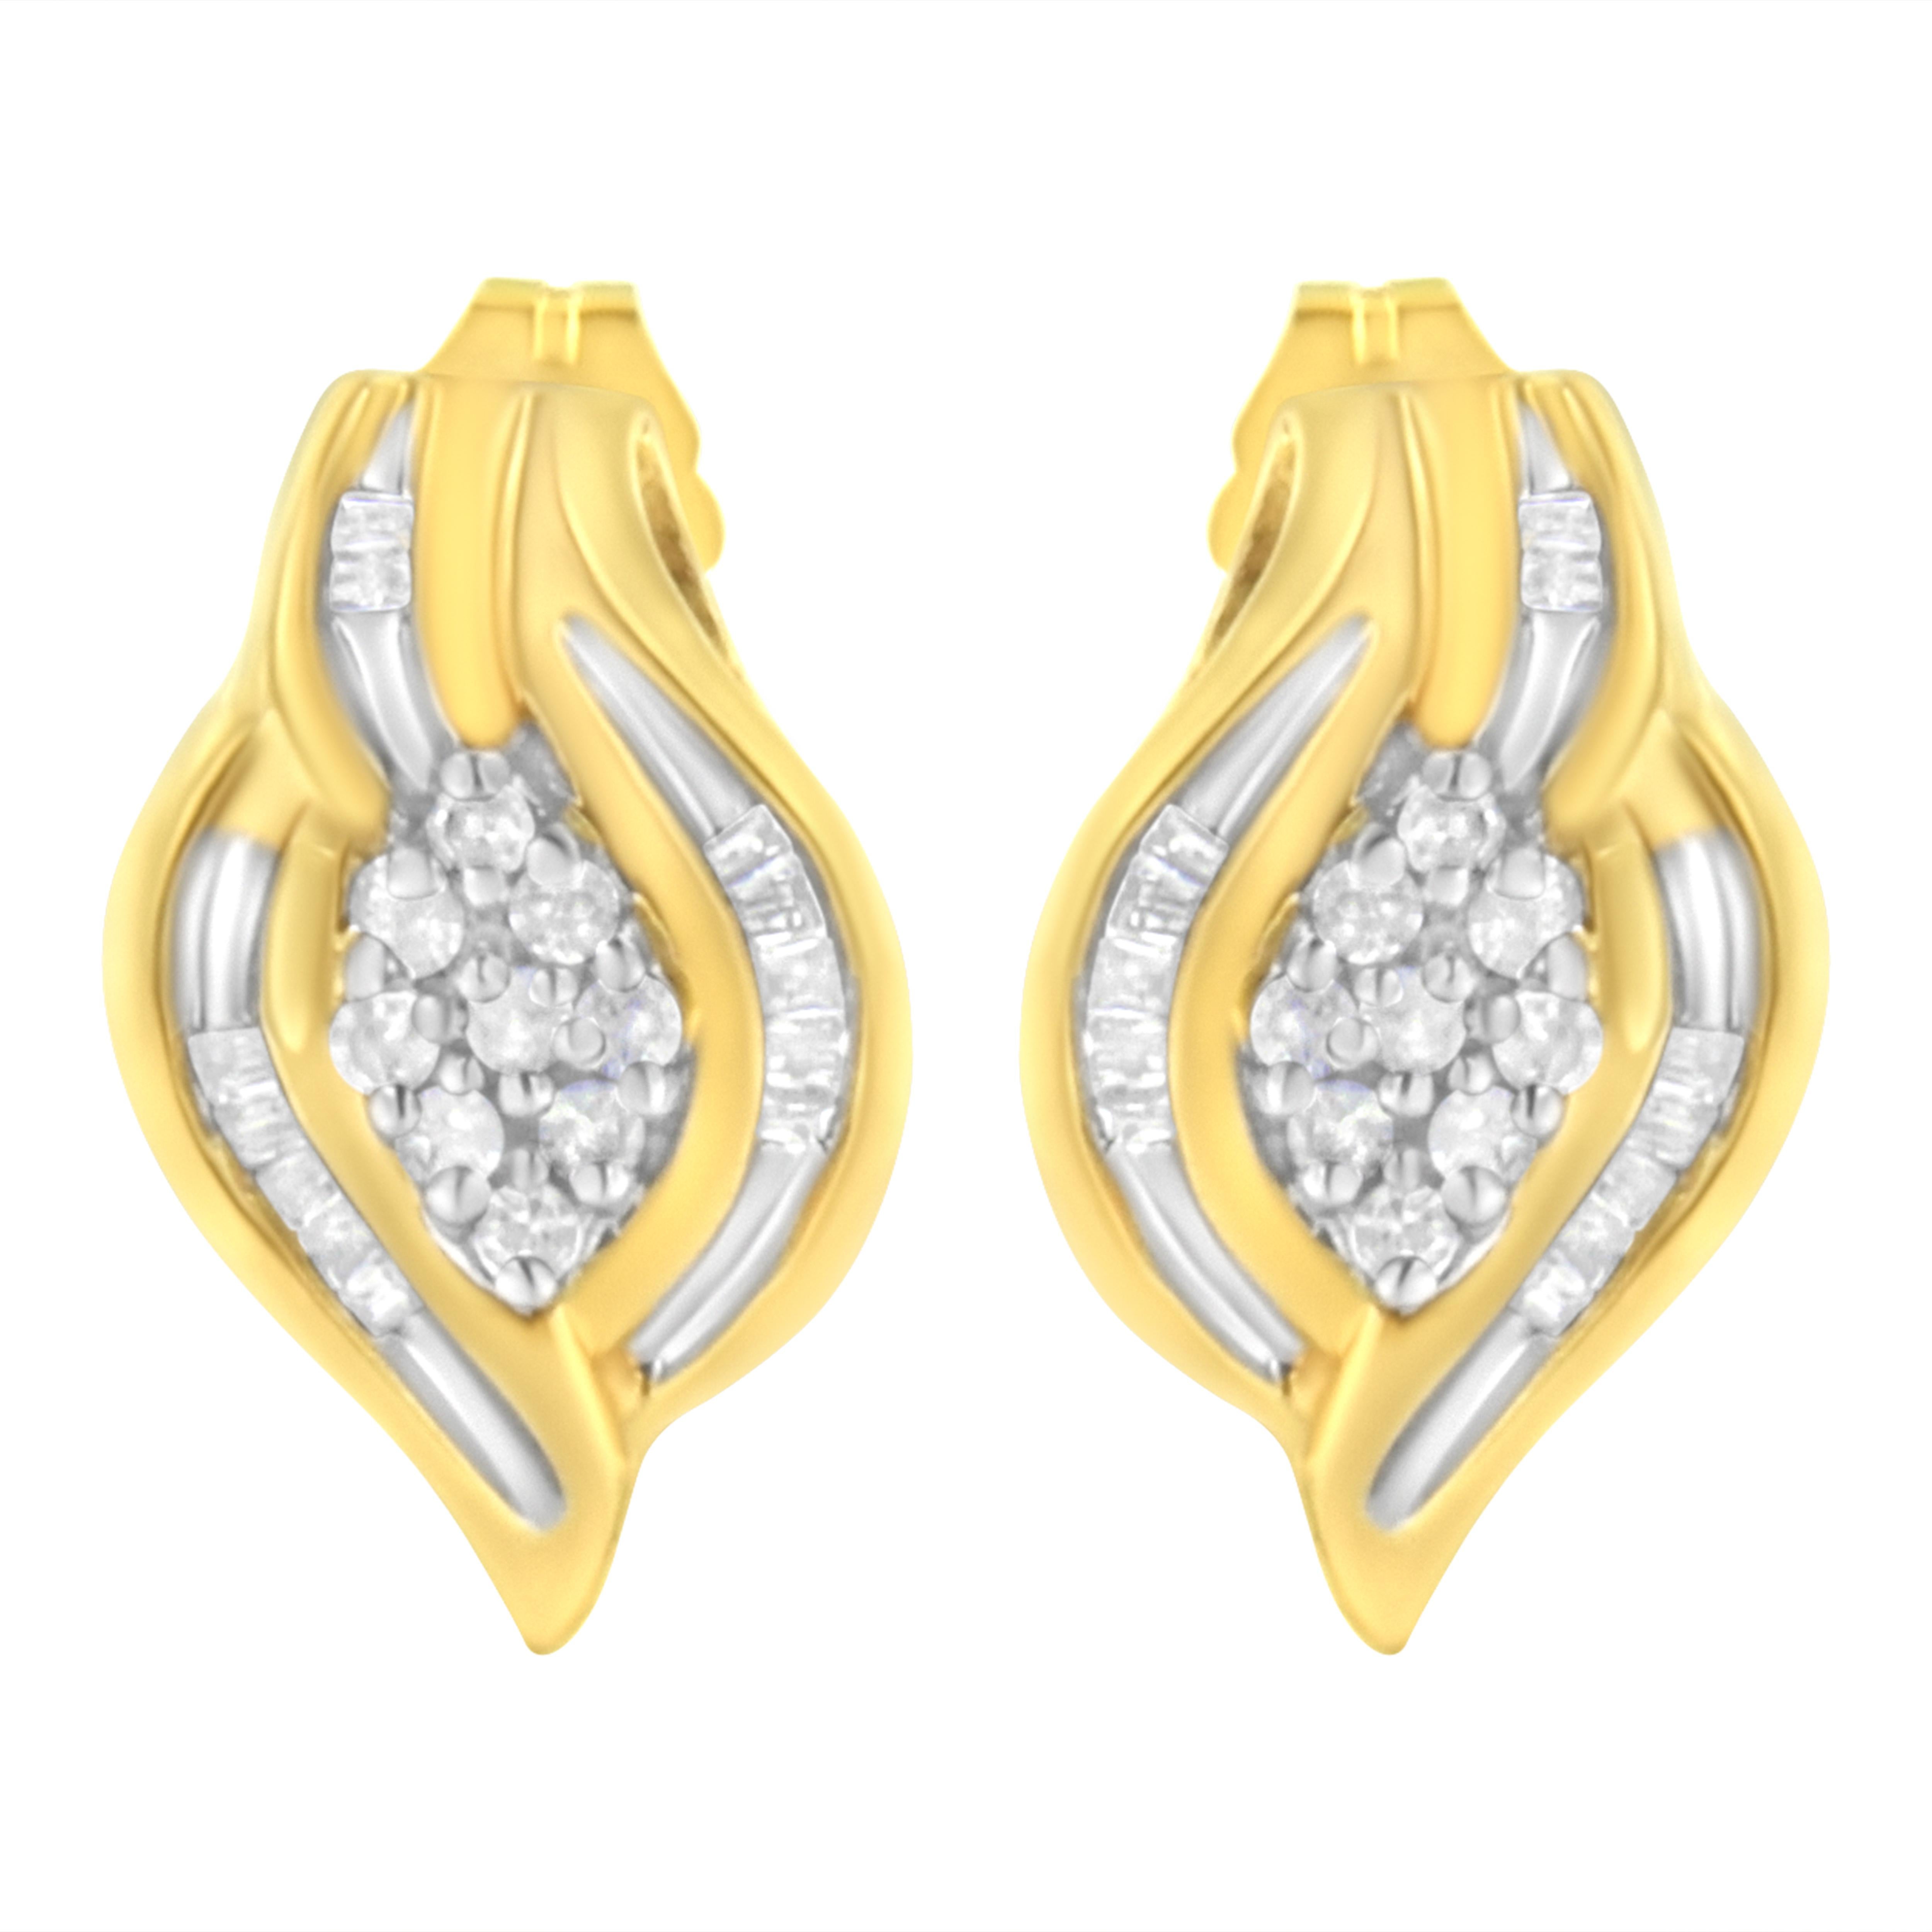 Contemporary 10K Yellow Gold 1/3 Carat Round-Cut Diamond Cluster and Swirl Stud Earrings For Sale